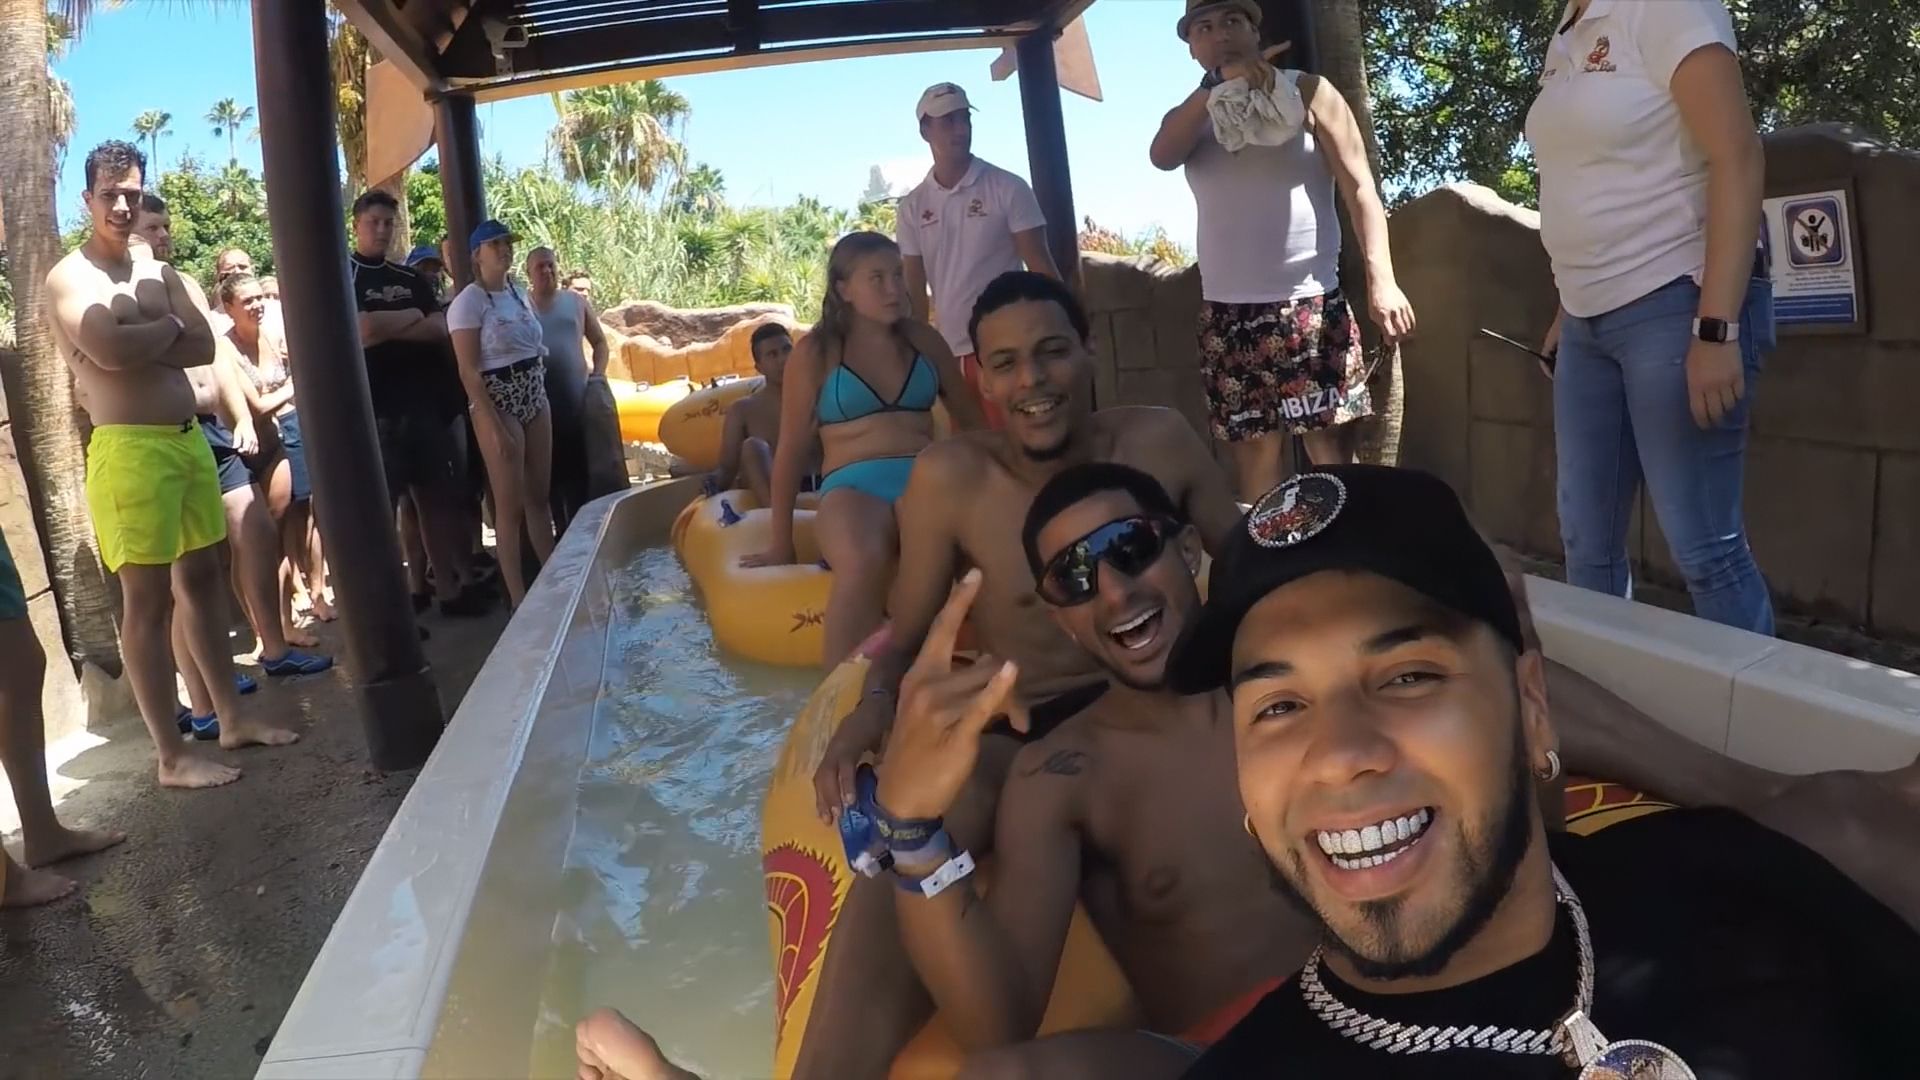 Siam Park, featured in the latest video clip by Anuel AA, Farruko and Zion